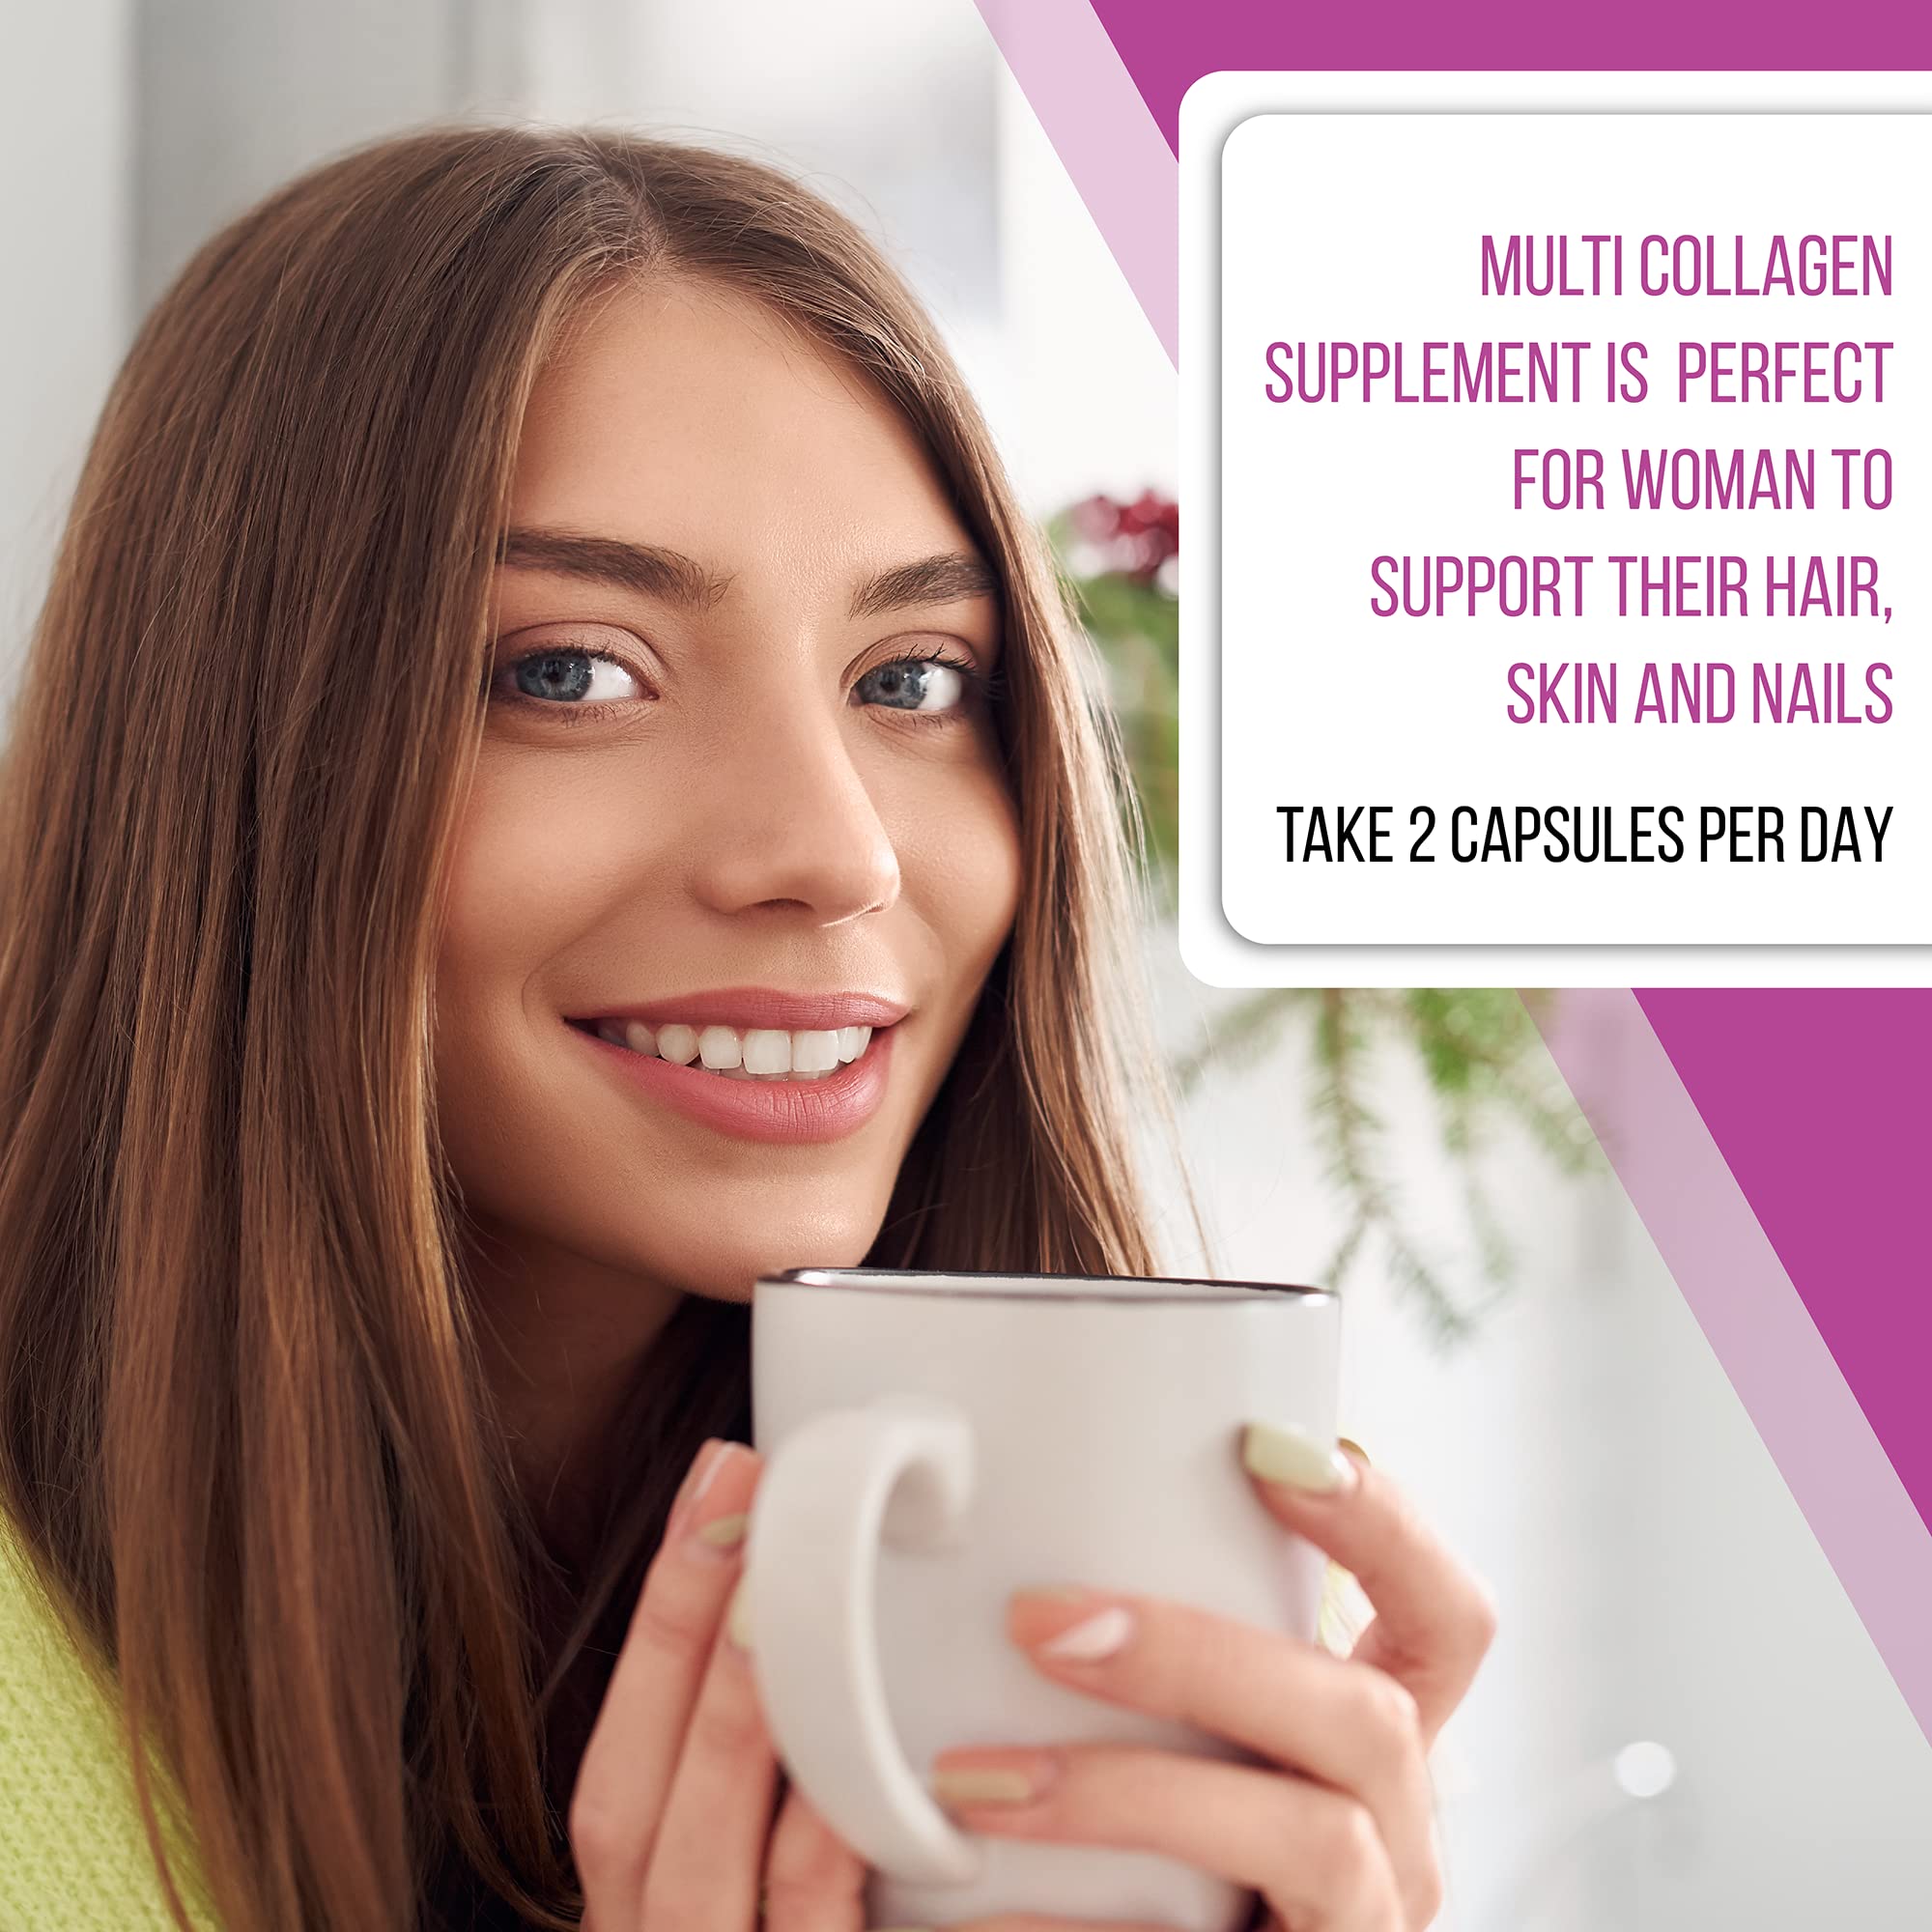 Collagen Powder Pills, Hydrolyzed Type 1 & 3 Peptides, Grass-Fed 5-in-1 Multi Collagen Complex Supplement, Healthy Hair, Skin, Nails, Bones & Joints, Keto & Paleo Friendly, Non-GMO, 60 Capsules